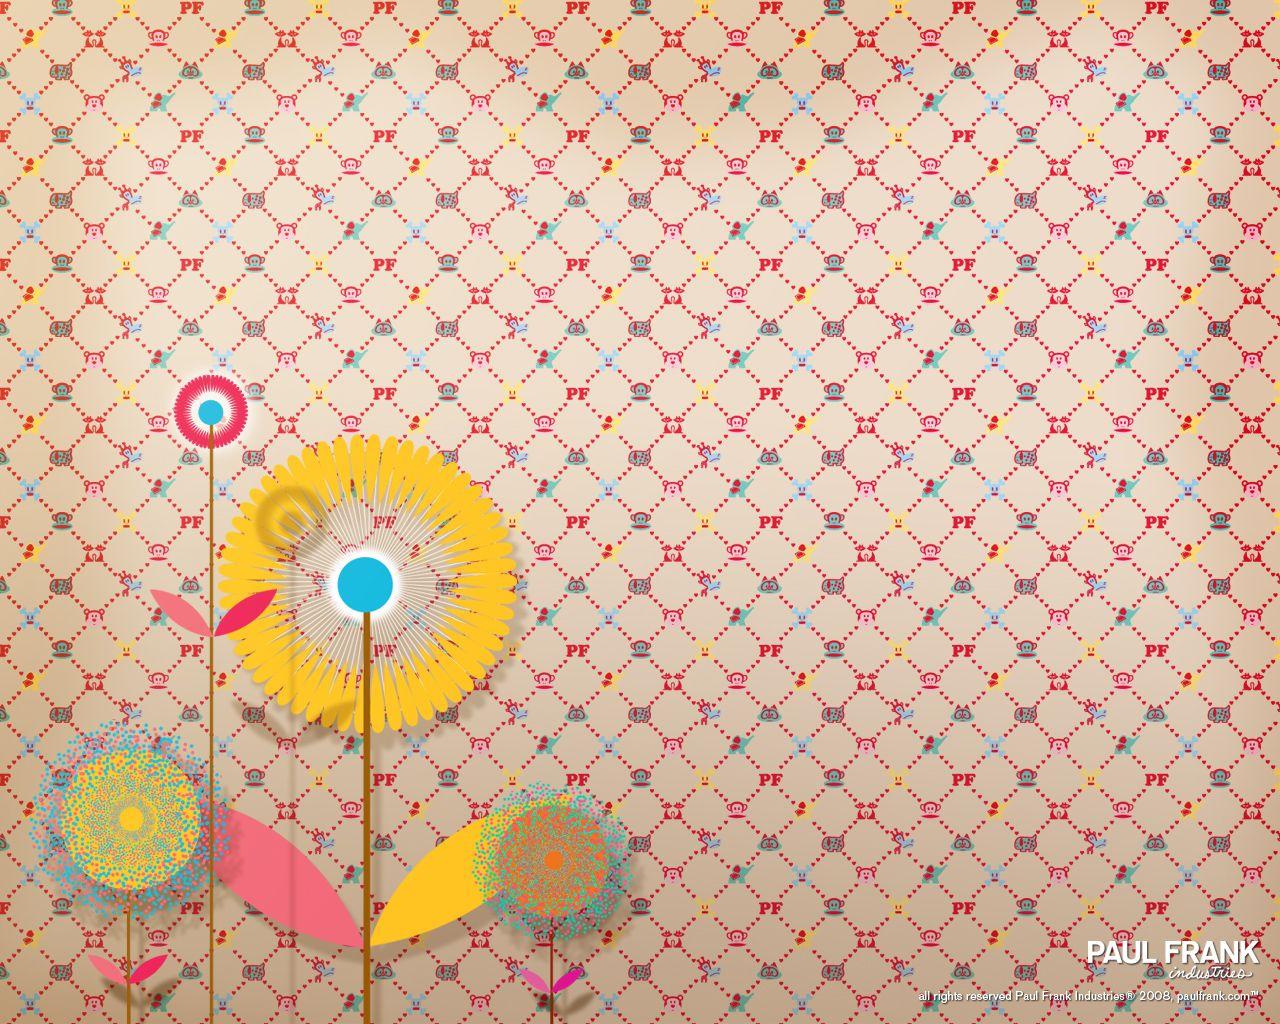 Paul Frank image Paul Frank HD wallpaper and background photo